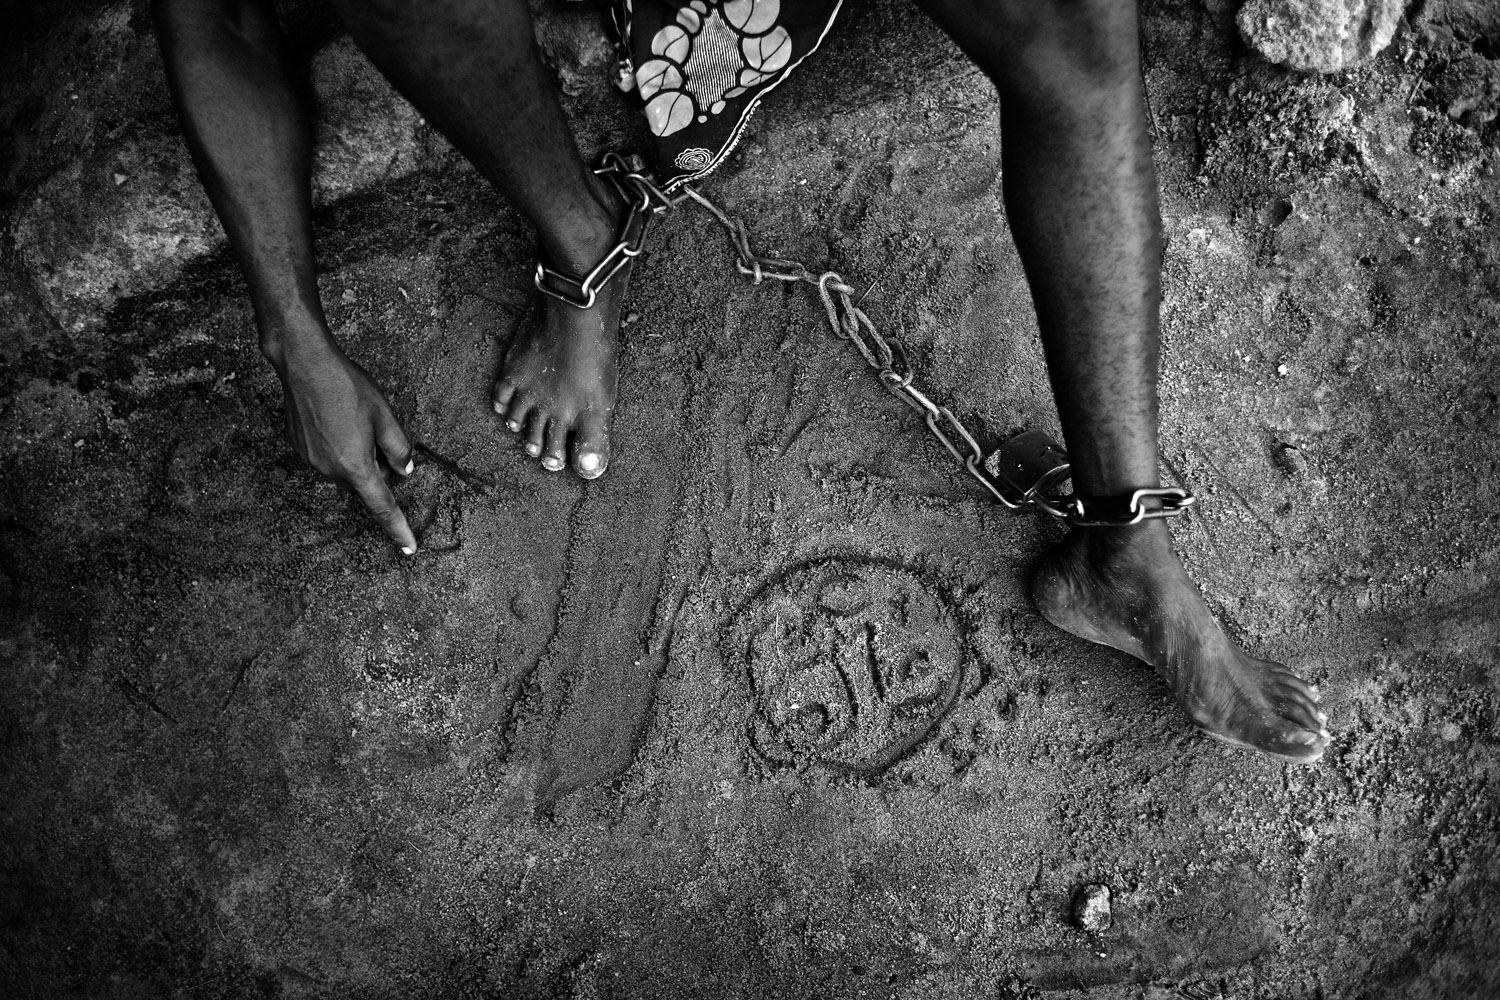 Reverend Apostle S.B.Esanwi, Doctor of Divinity, treats people with mental illness with prayer and traditional medicines which usually consist of roots and leaves crushed in water. He claims to have cured hundreds of patients. Many stay for months in his compound. Some are chained throughout their time there. The Niger Delta, Nigeria. October 2012. Photo Robin Hammond/Panos